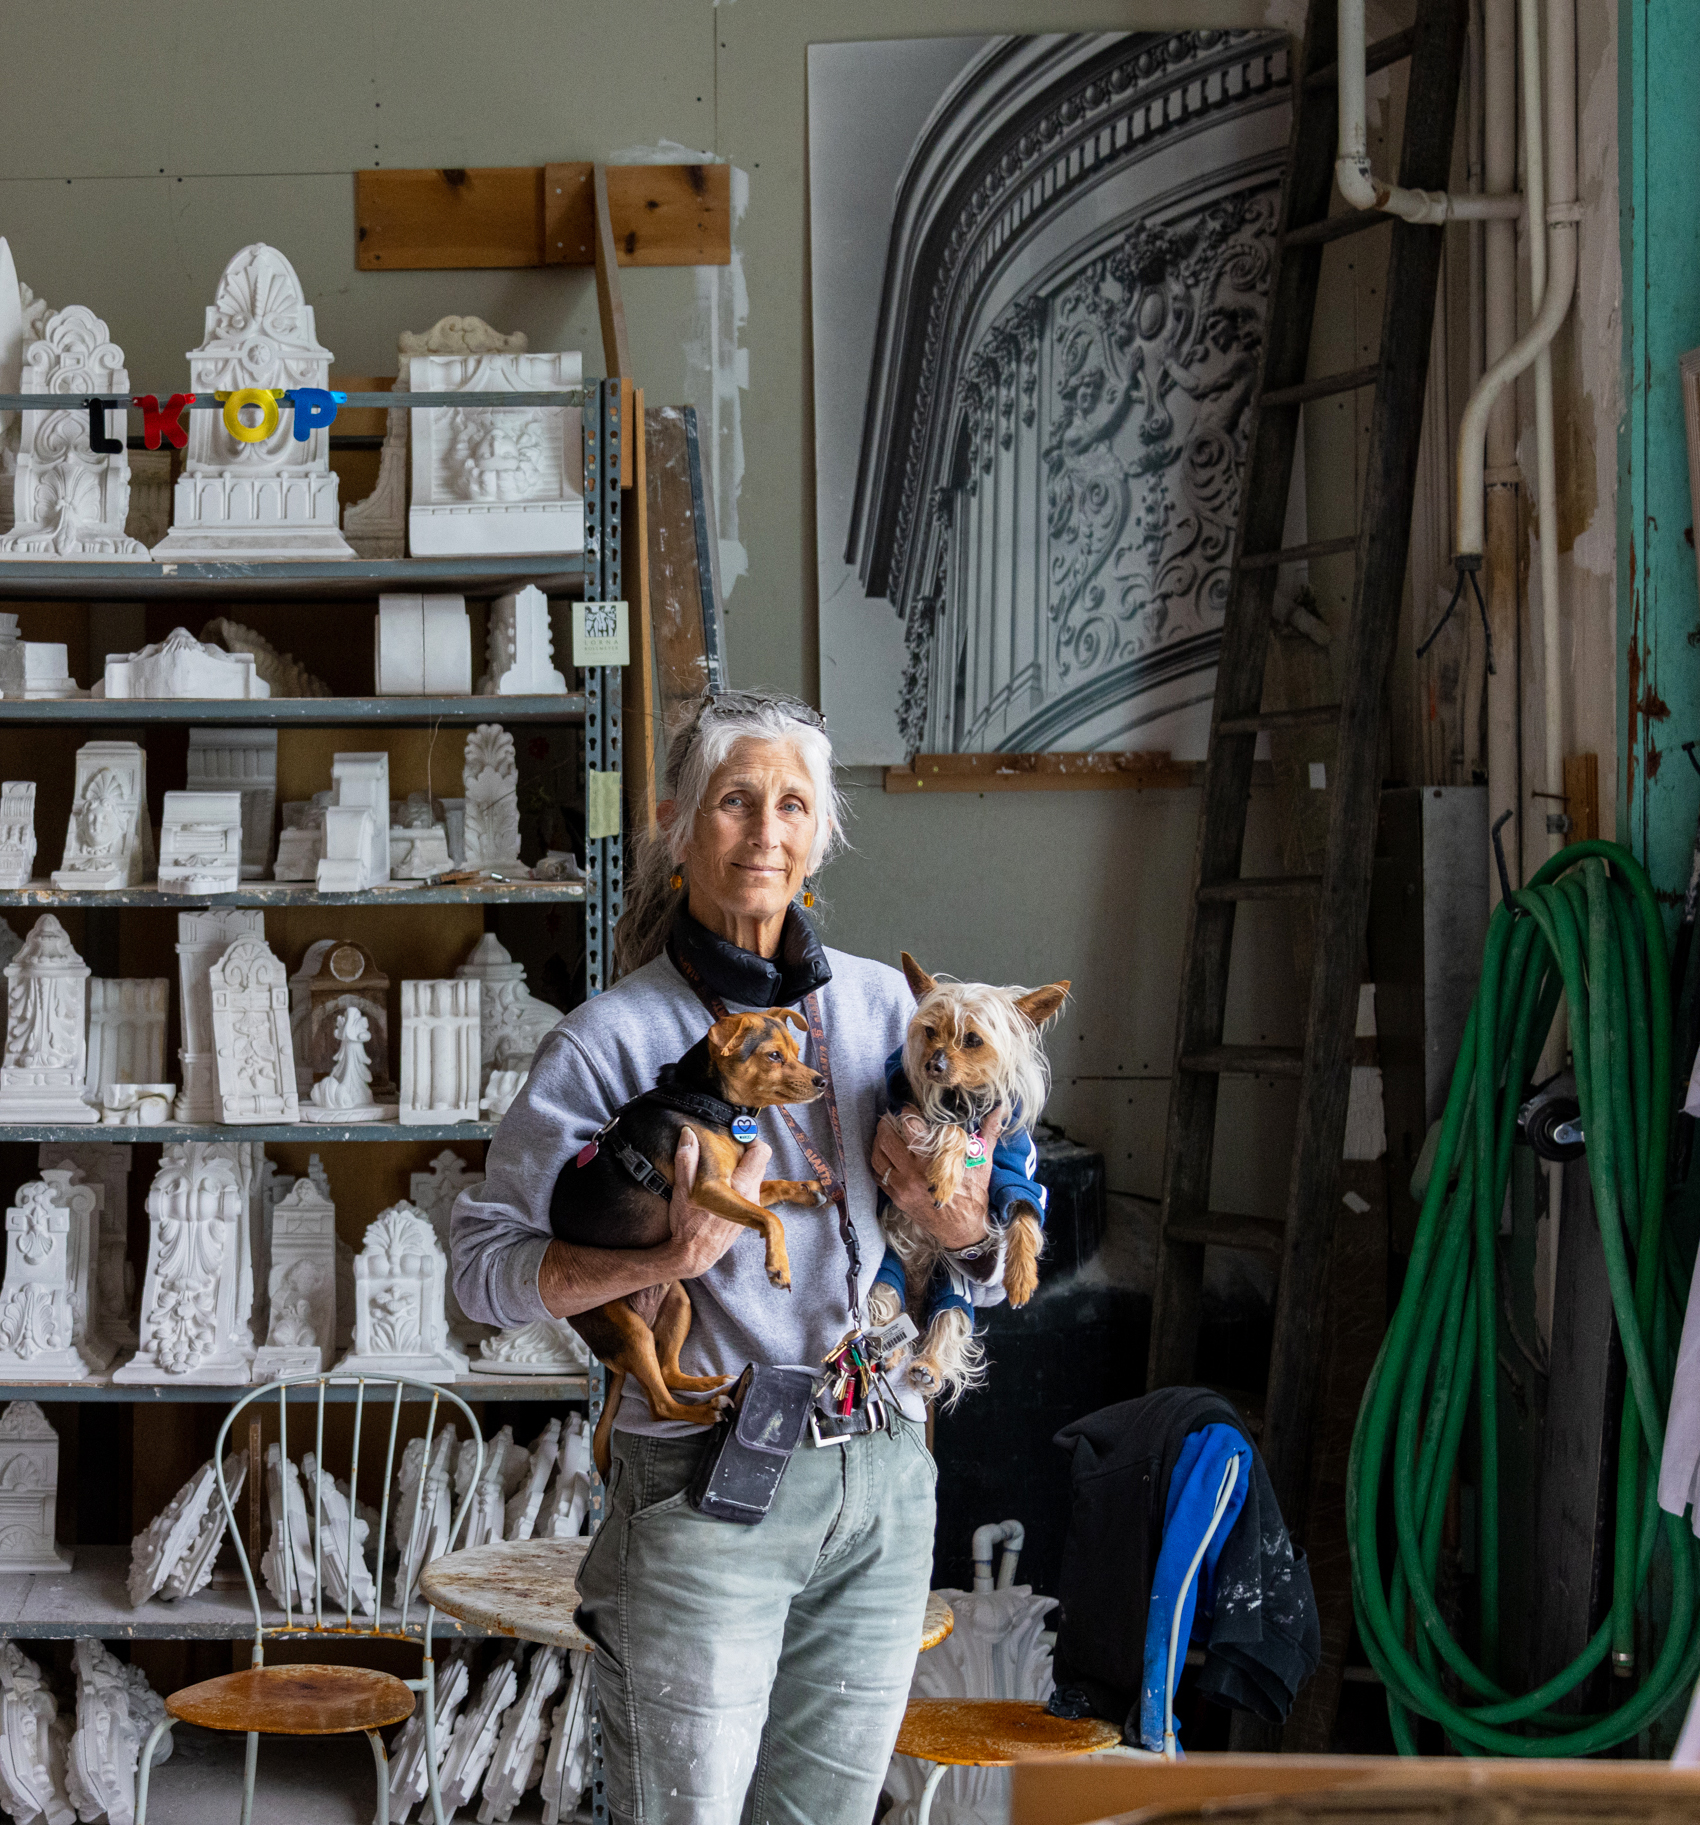 A woman holding two dogs stands in a workshop surrounded by plaster sculptures and molding tools.